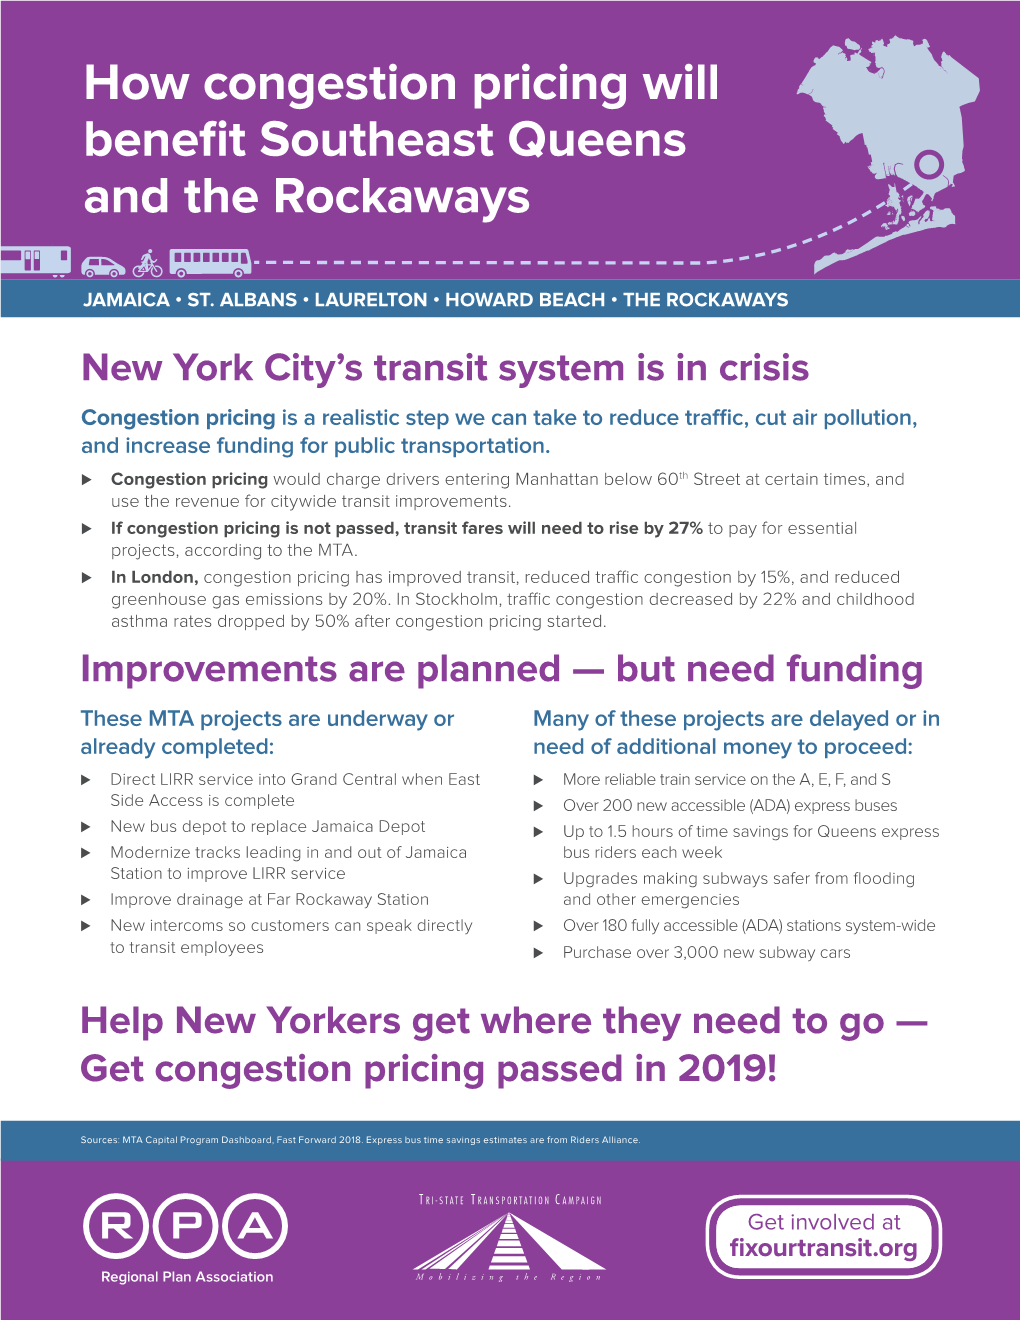 How Congestion Pricing Will Benefit Southeast Queens and the Rockaways